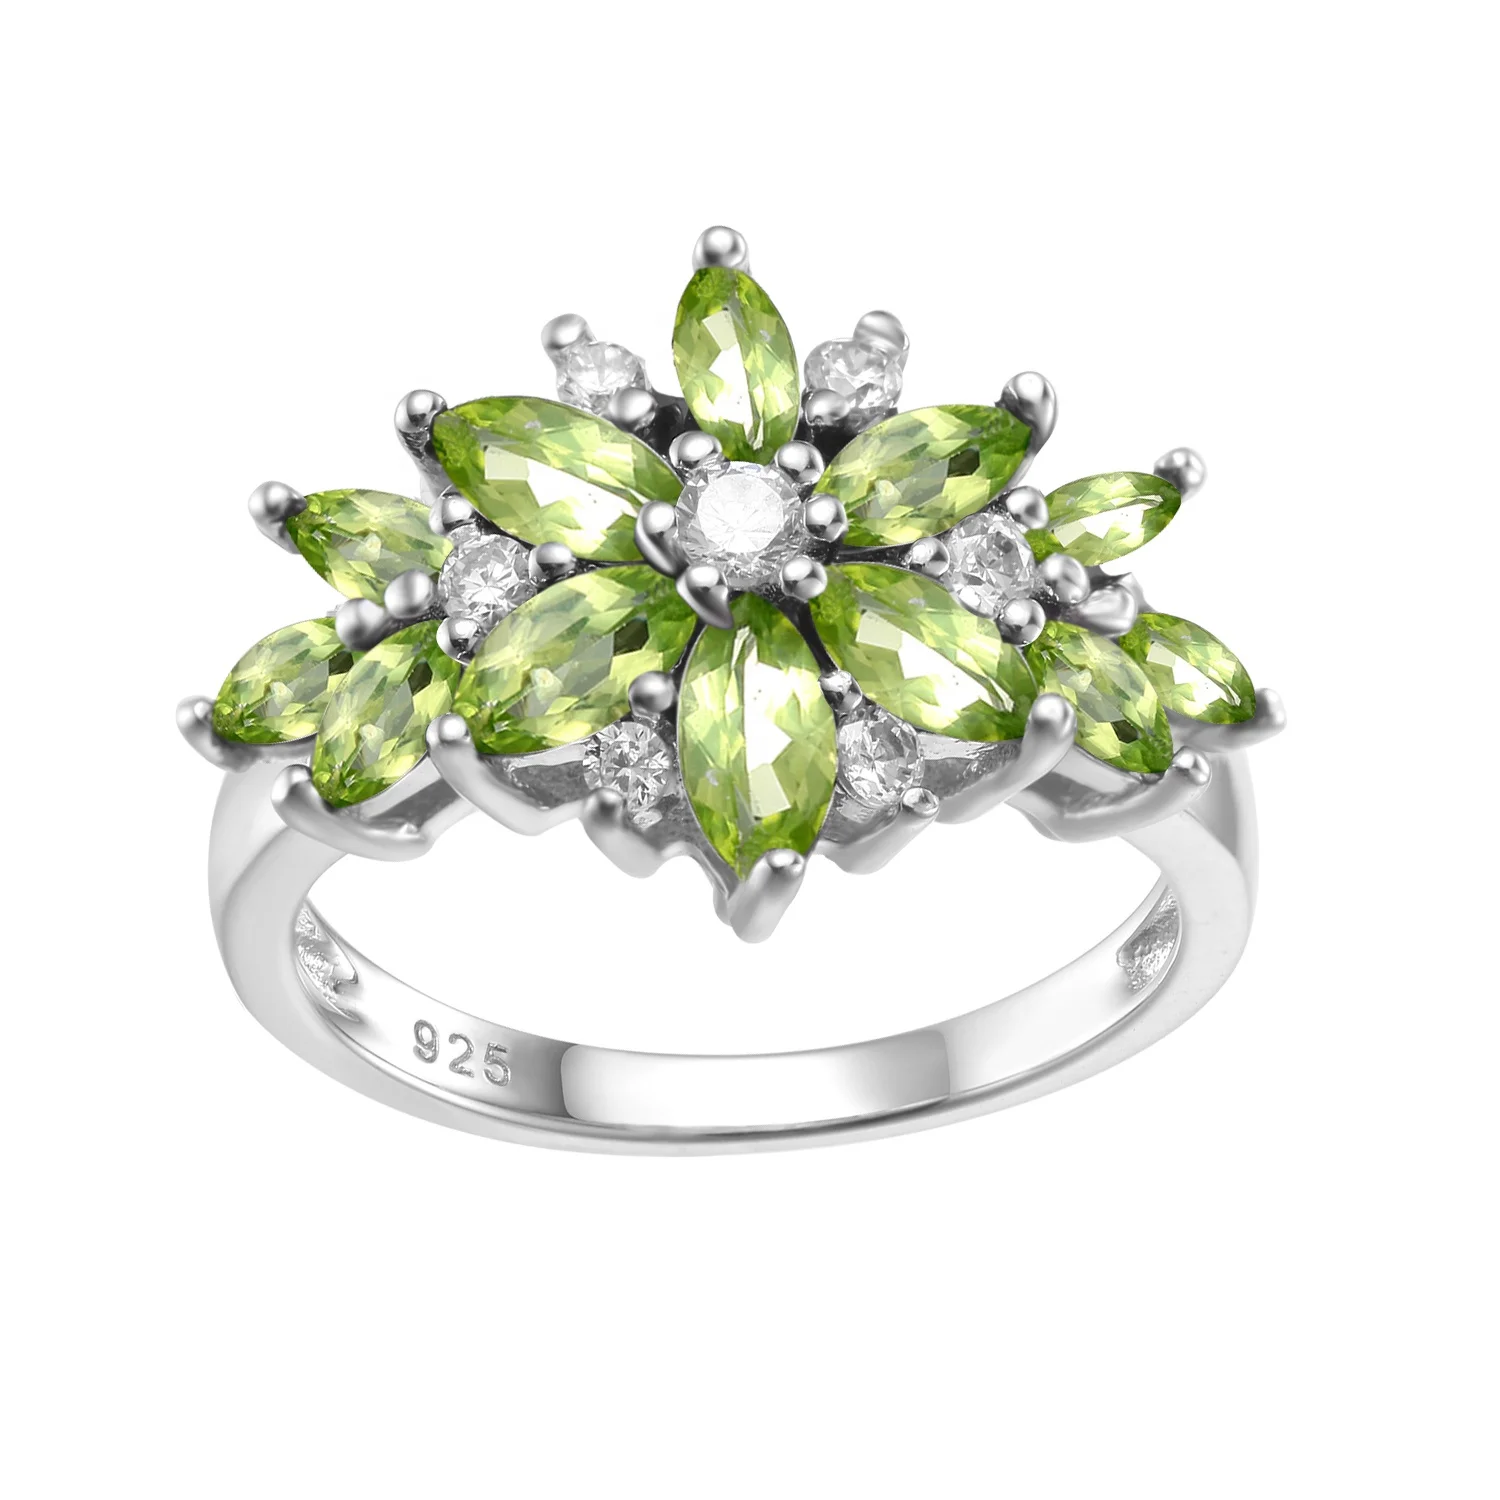 

Abiding Jewelry Fancy Natural Peridot Gemstone 925 Sterling Silver Snowflake Ring Picnic Ring Girl Accessory Jewelry